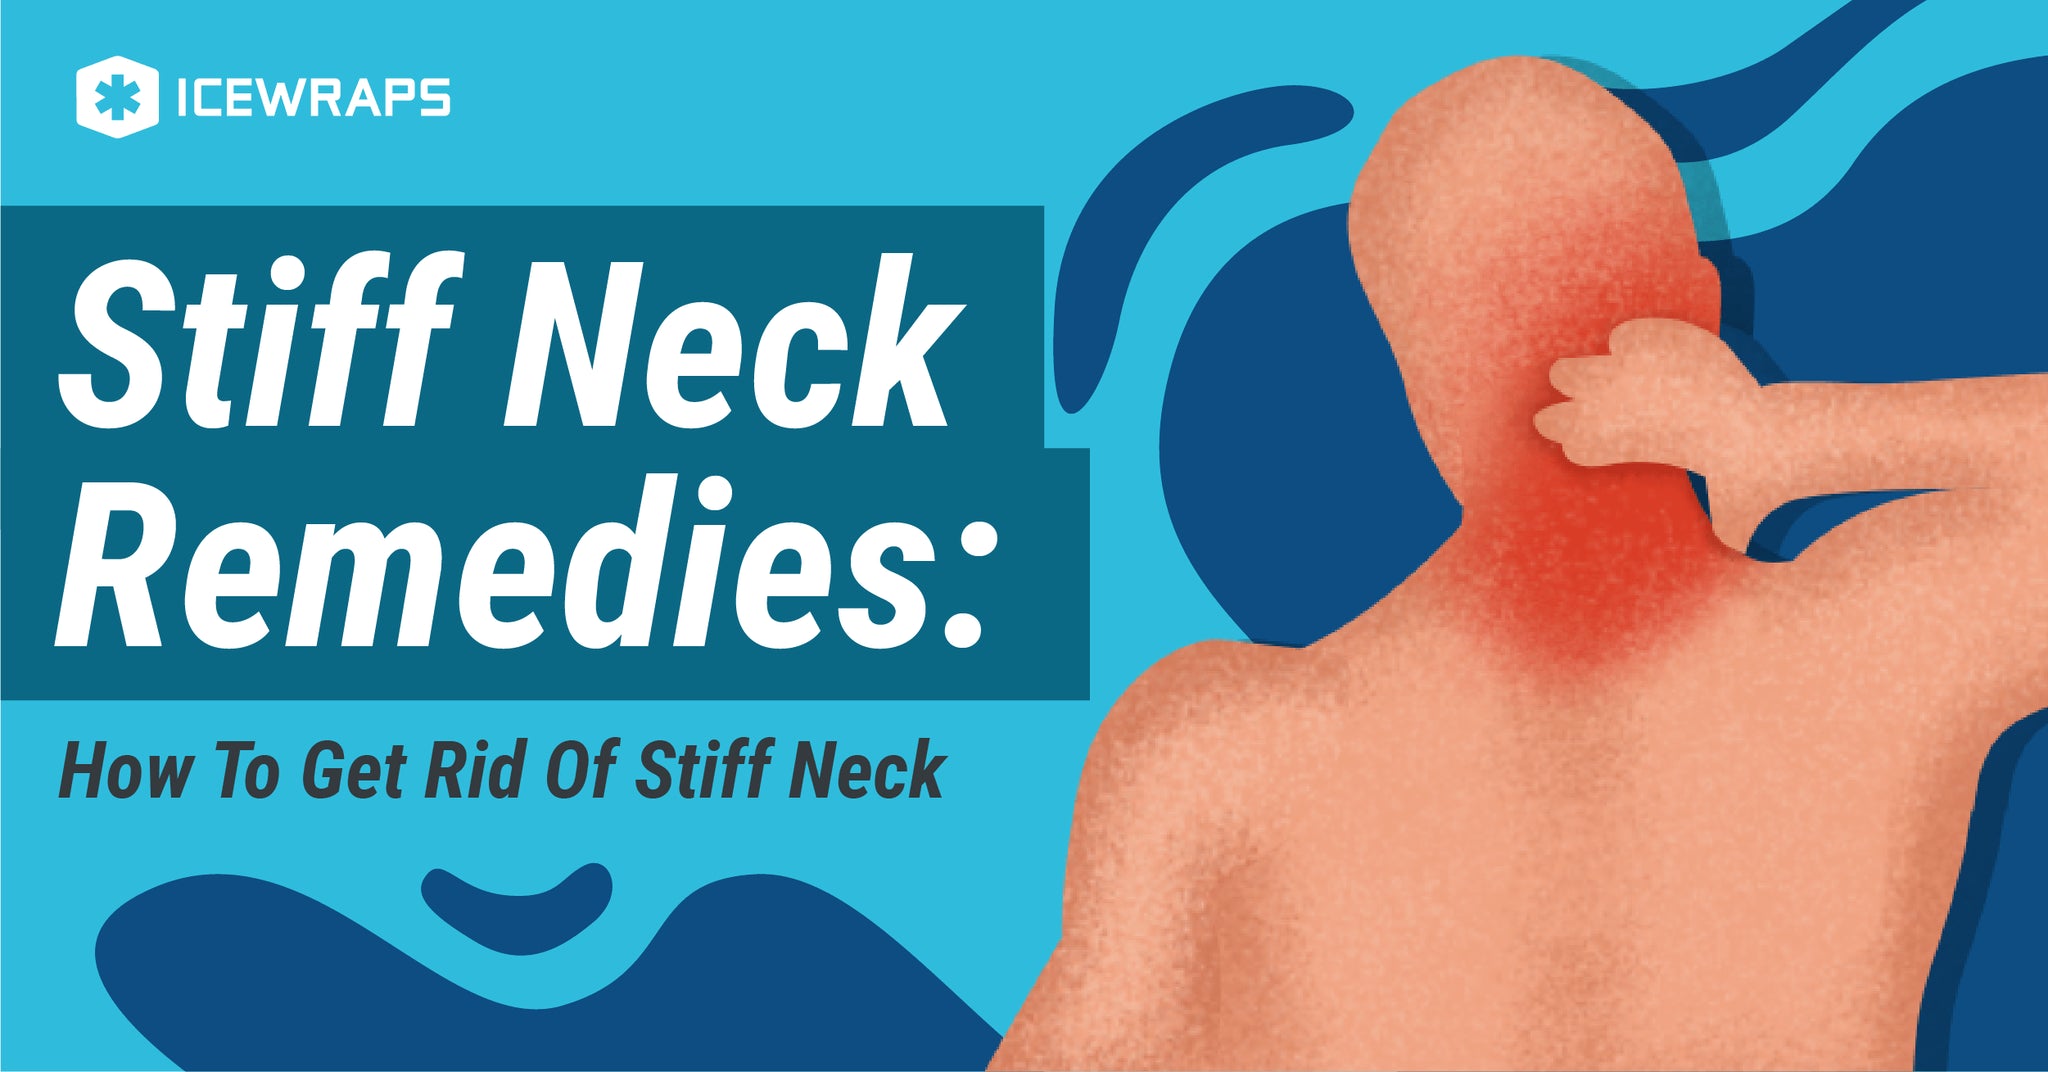 How to Prevent and Treat a Stiff Neck in 2022